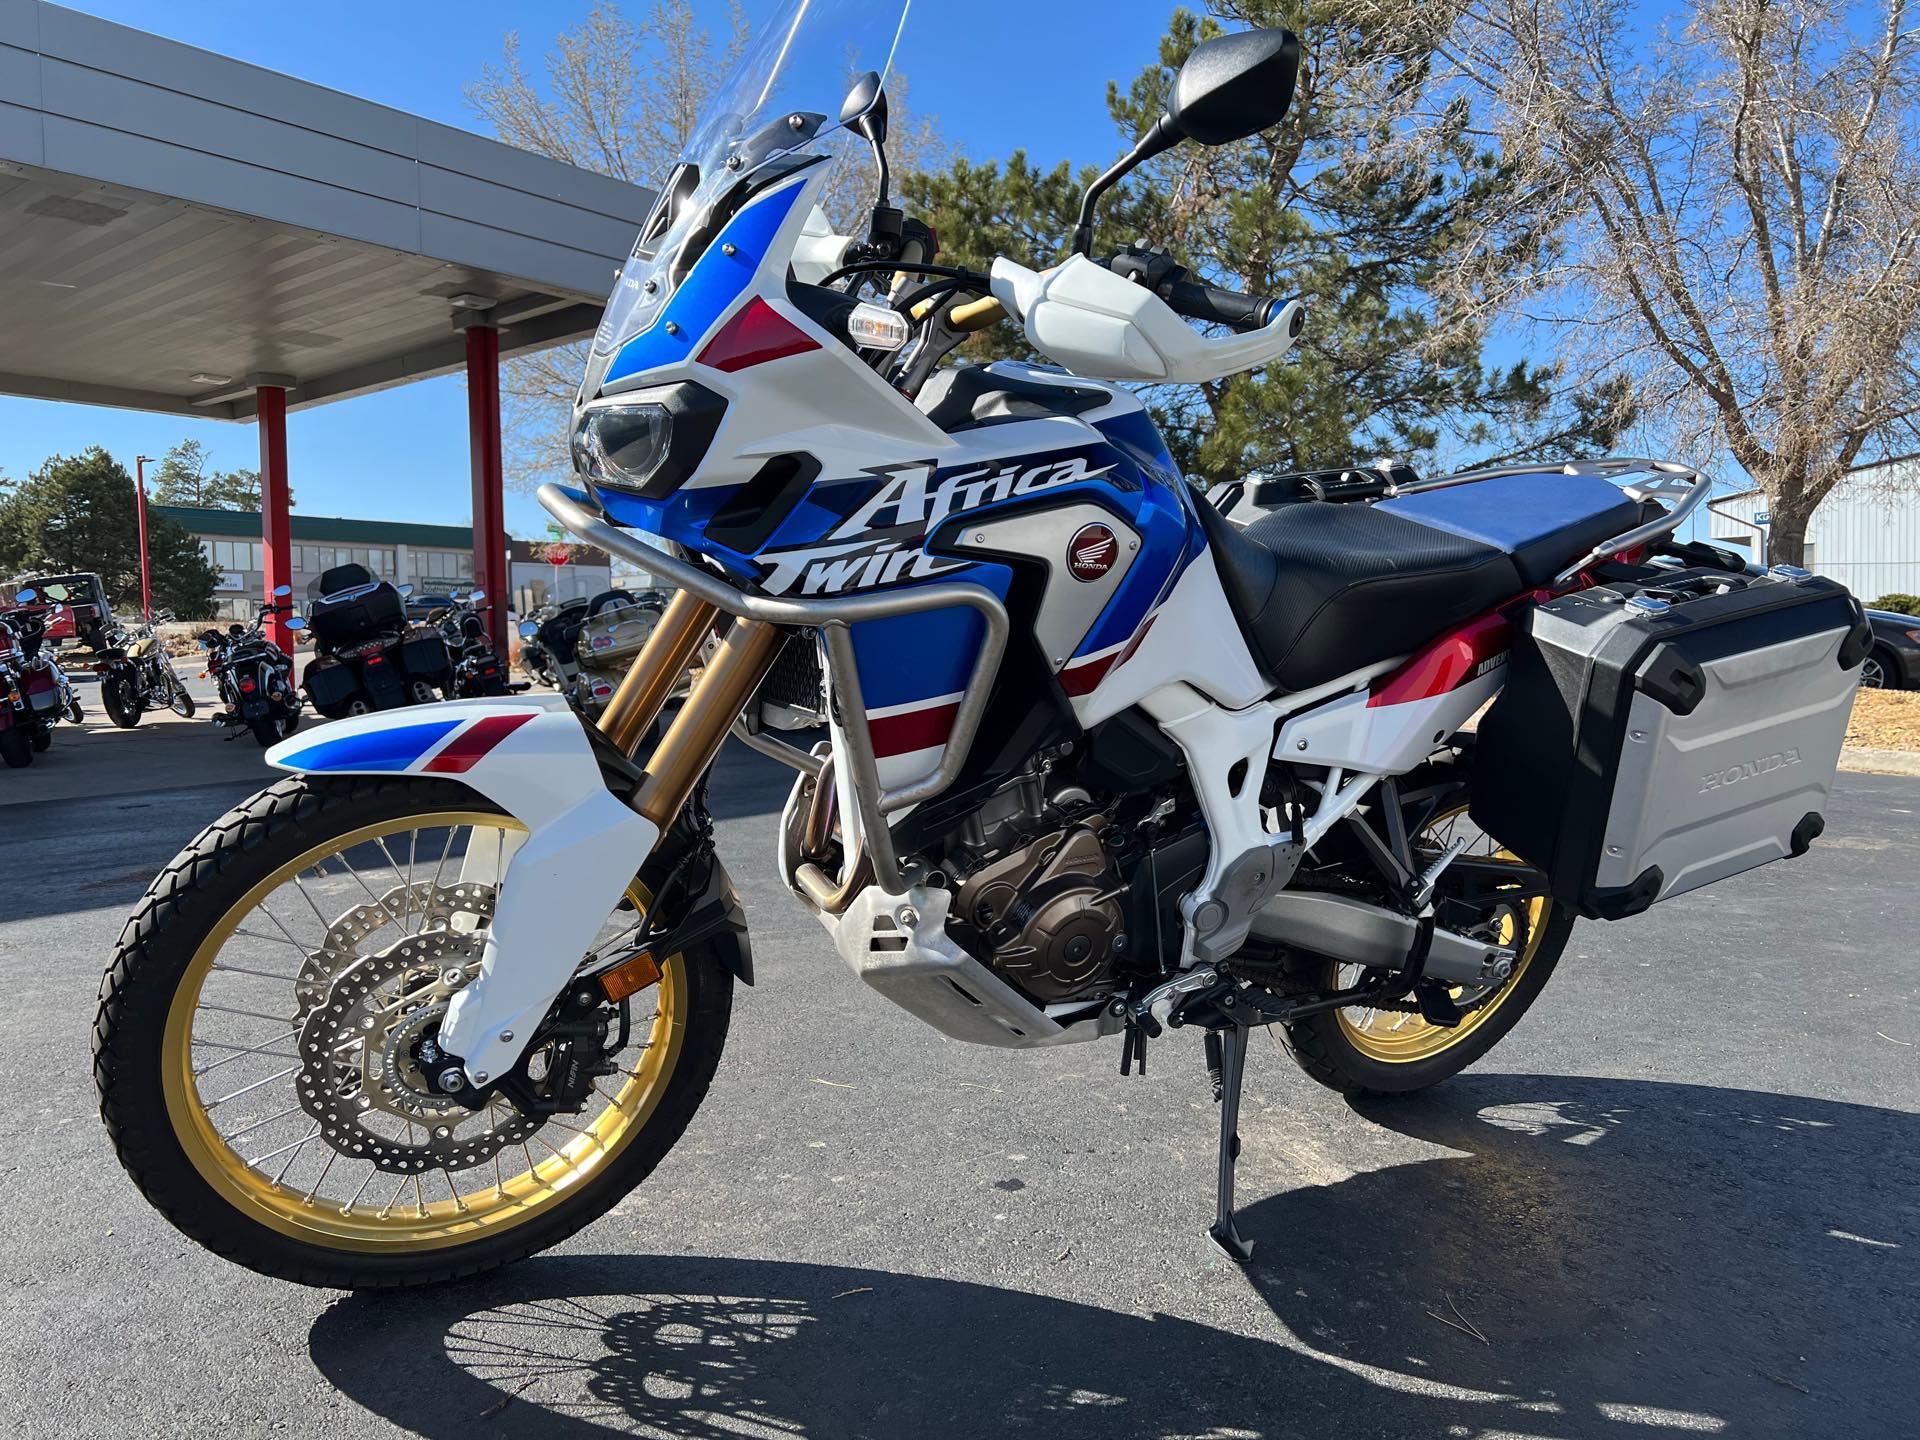 2018 Honda Africa Twin Adventure Sports at Aces Motorcycles - Fort Collins